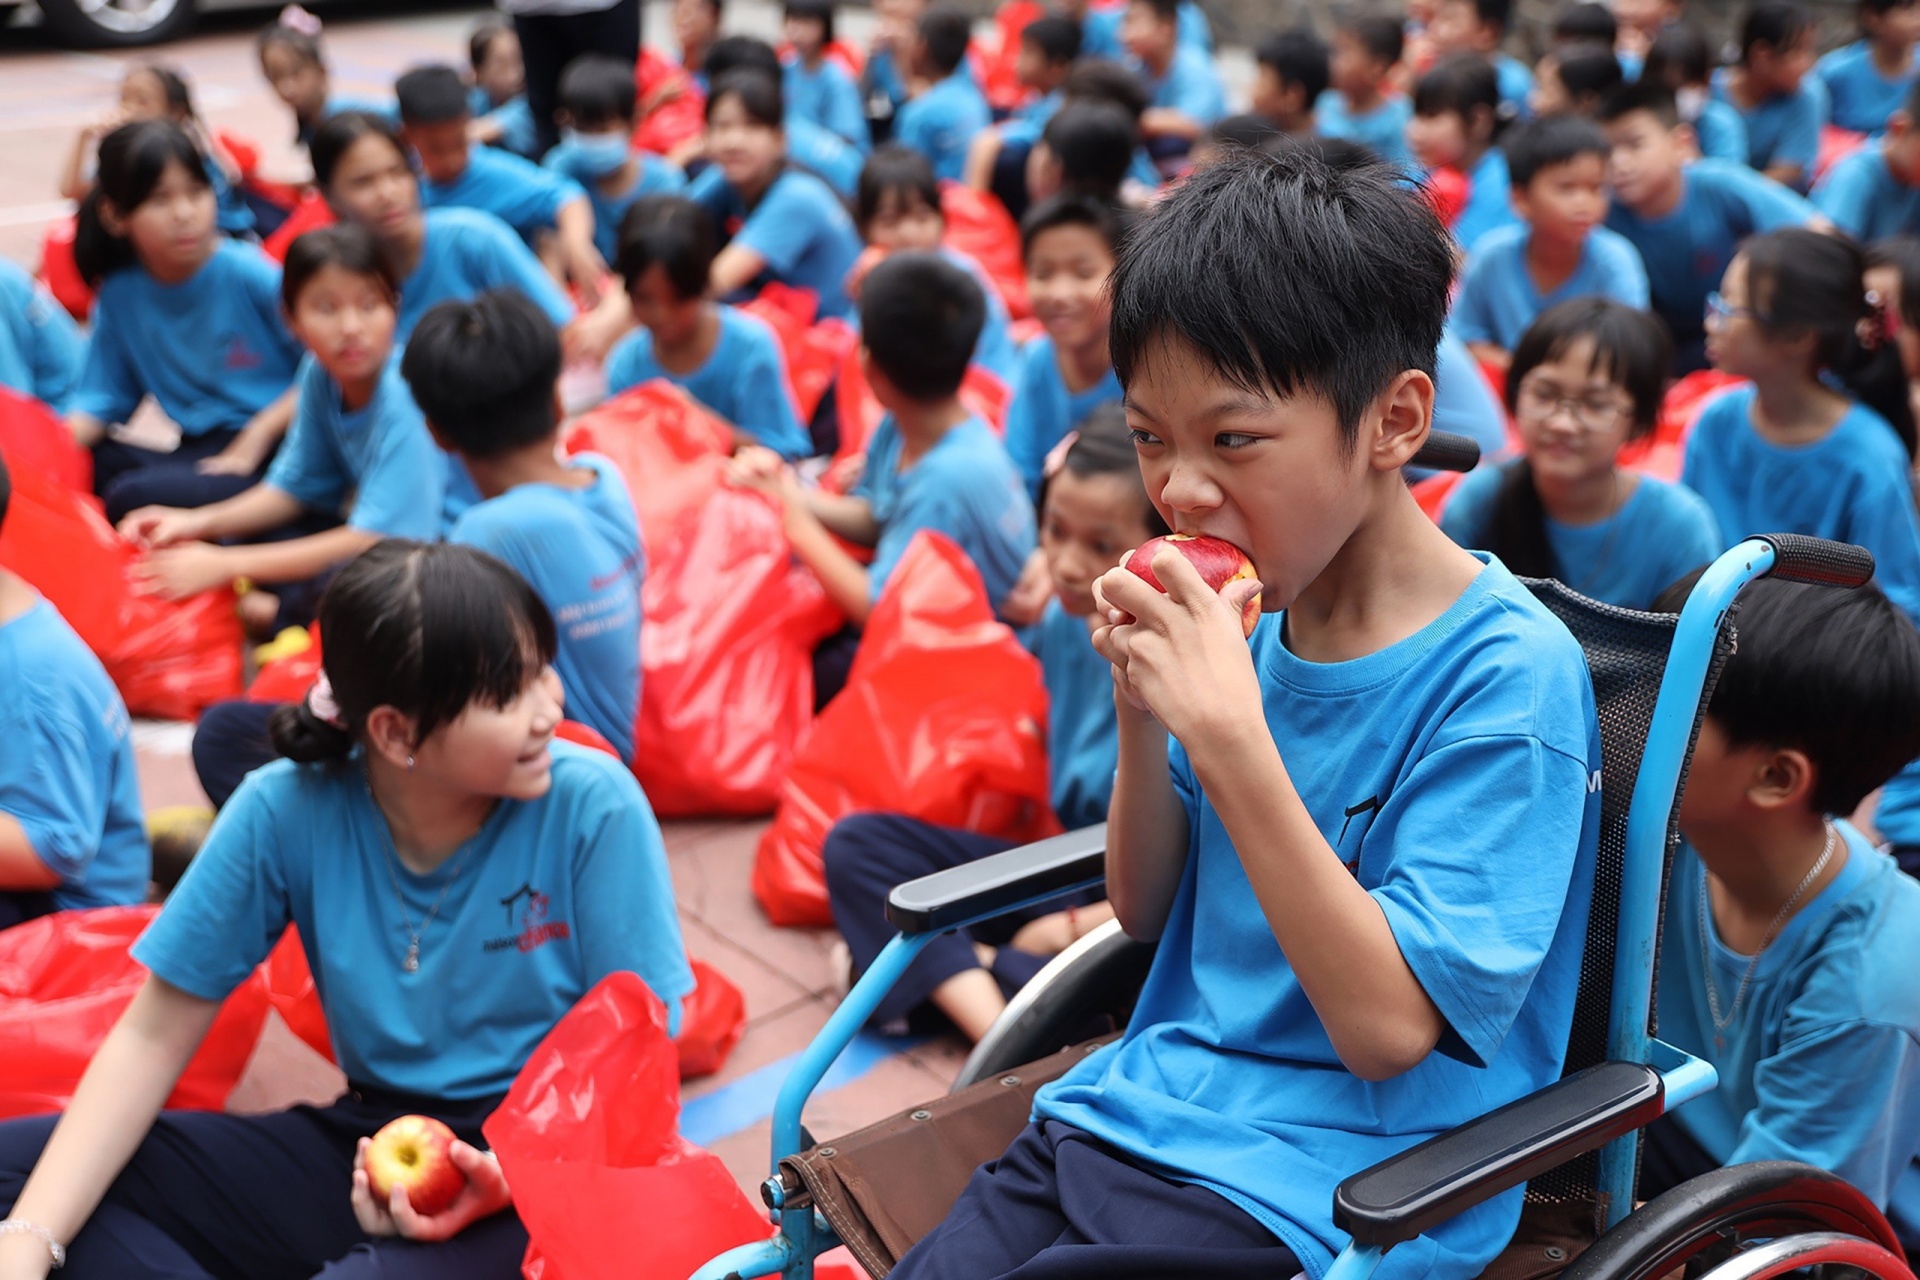 Companies from New Zealand donate fruit and milk to vulnerable children in Vietnam